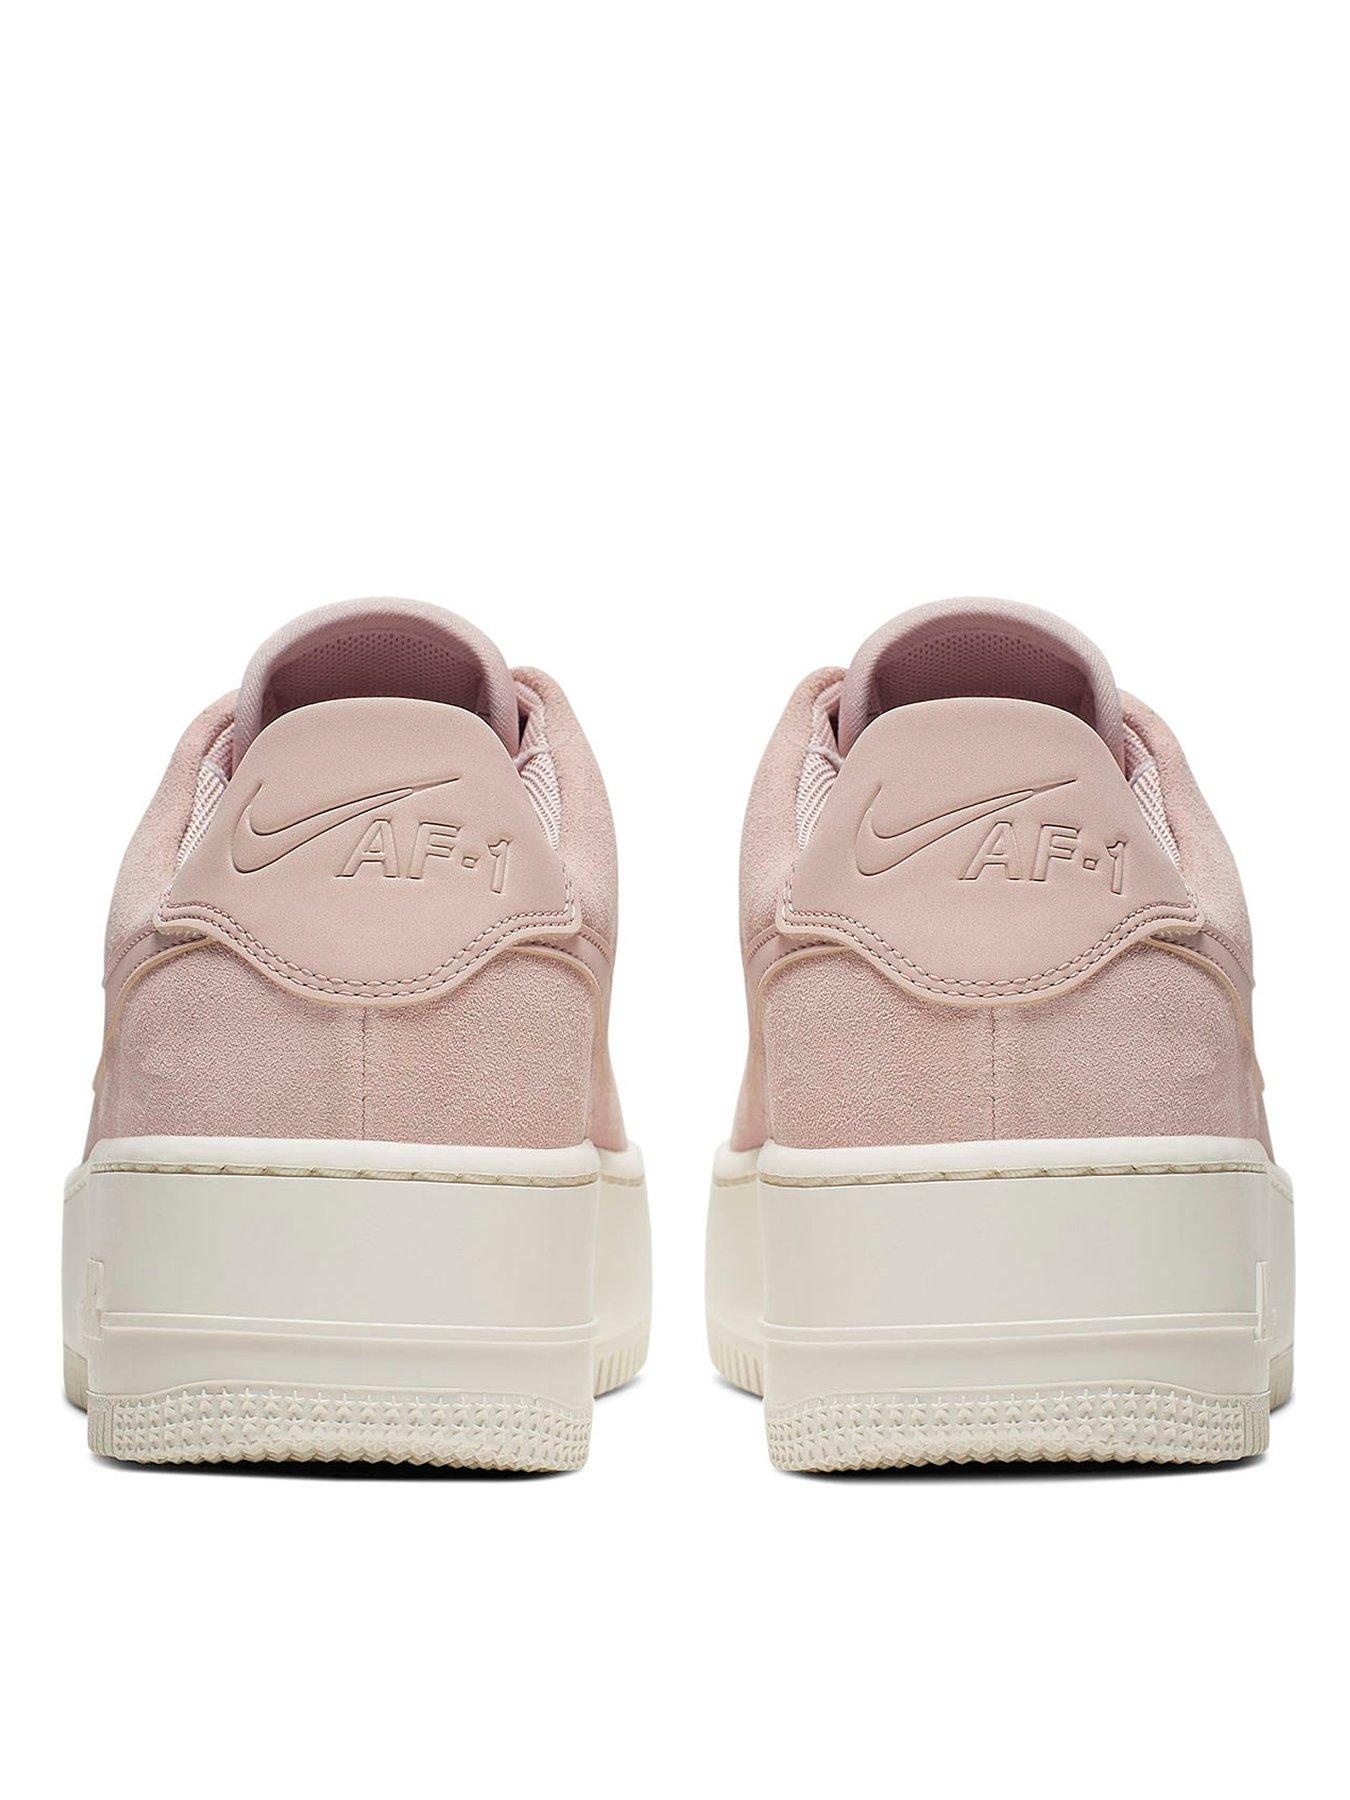 pale pink air force ones